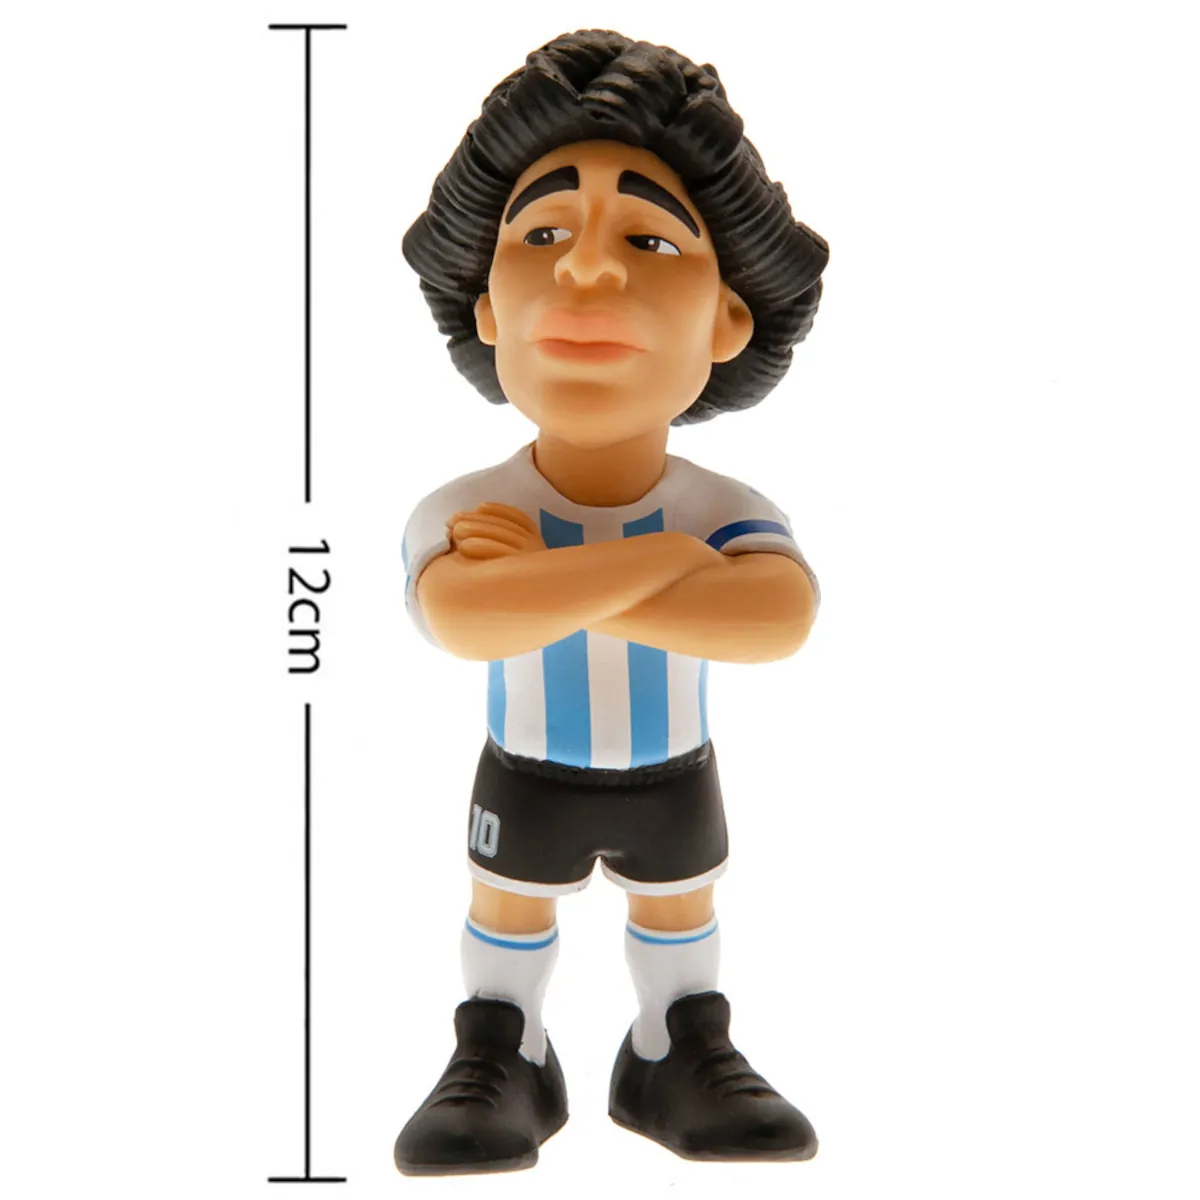 Minix Collectable Figurines Soccer 12 cm - Collect Them All